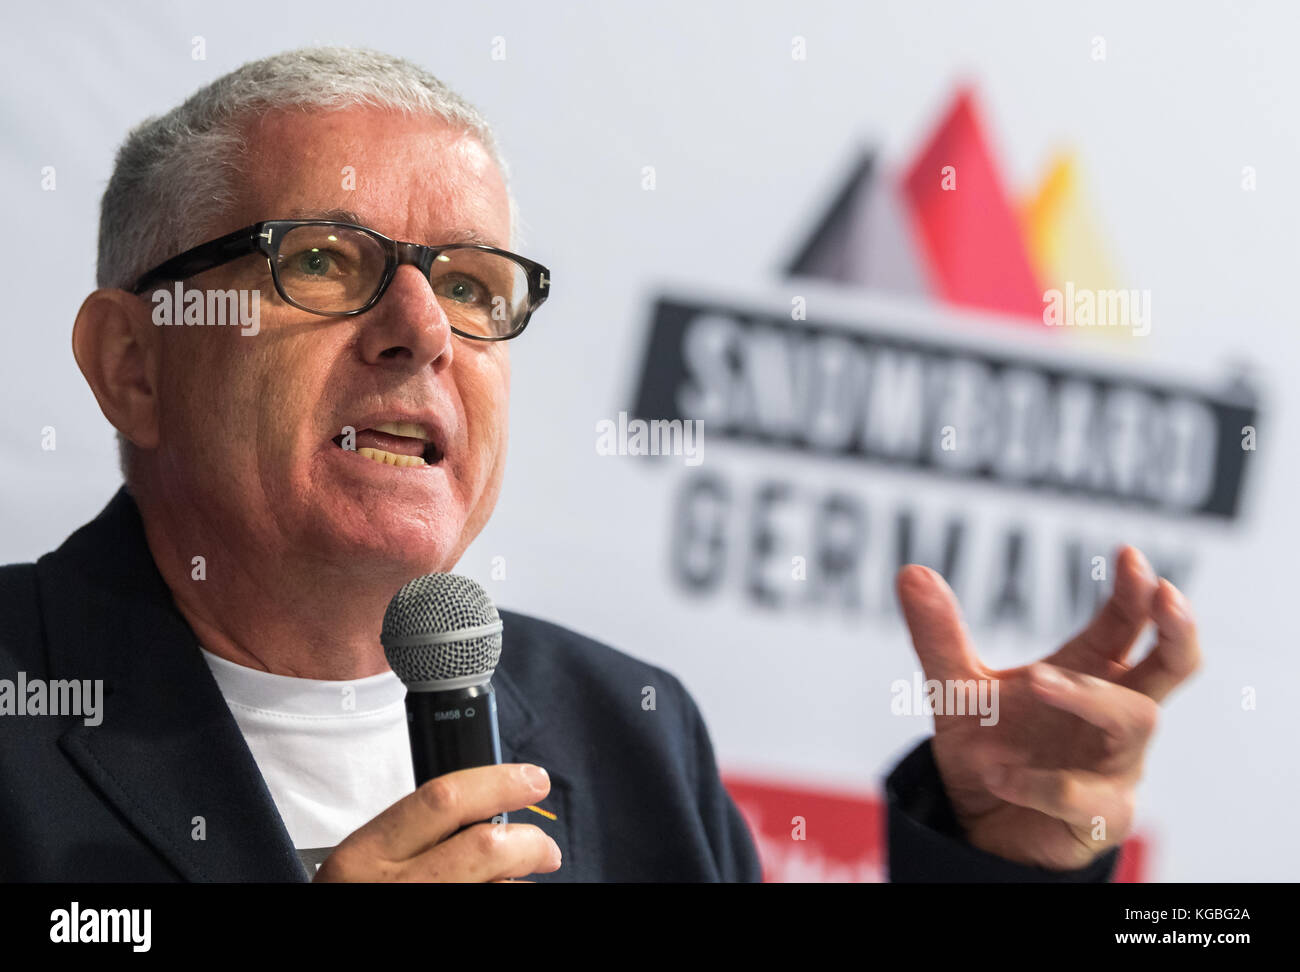 The president of the association Snowboard Germany, Michael Hoelz, can be seen during a press conference for the start of the season in Munich, Germany, 6 November 2017. Photo: Peter Kneffel/dpa Stock Photo